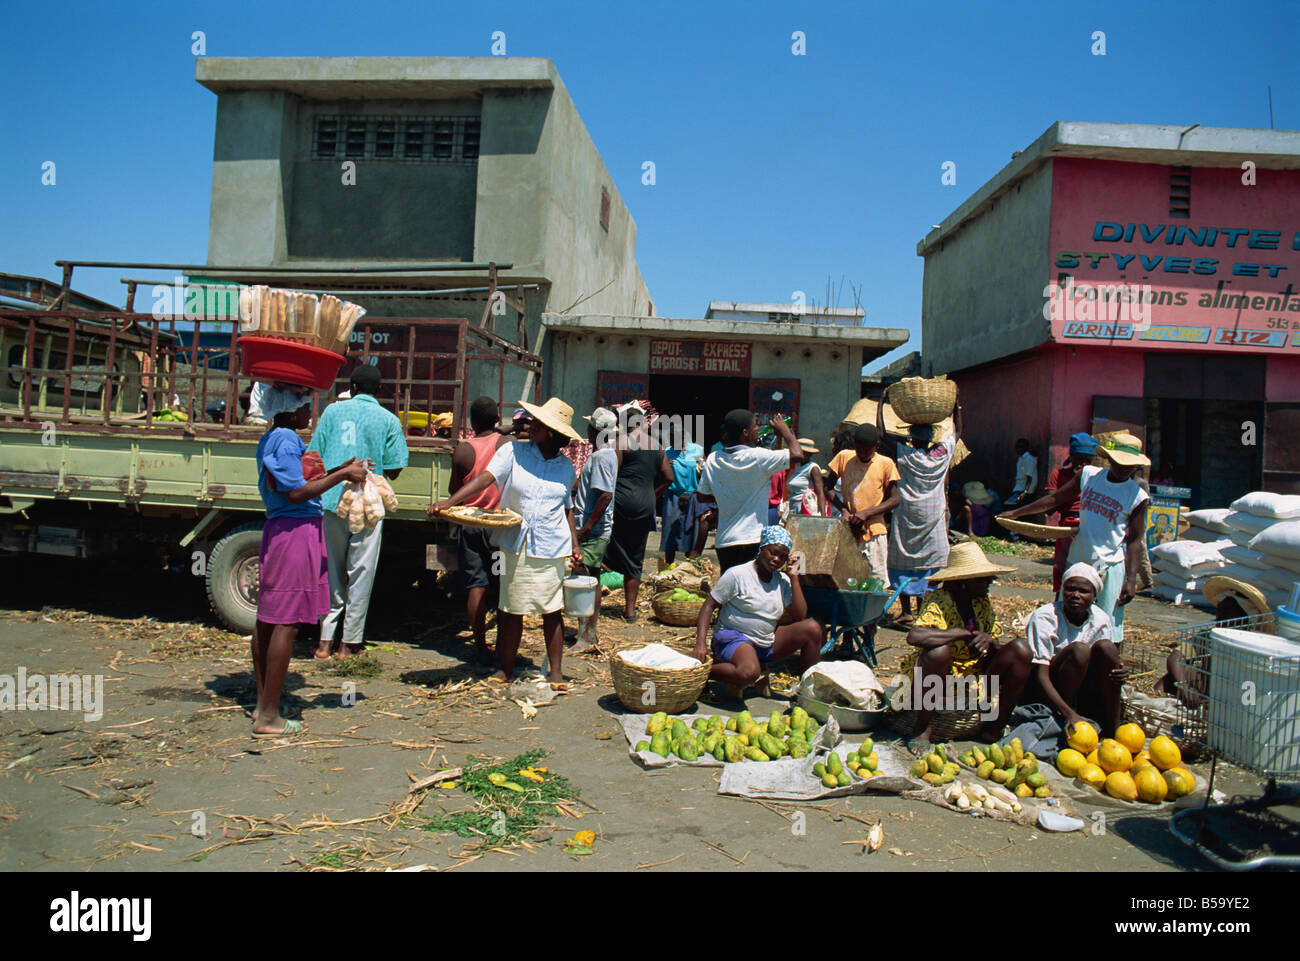 Women selling tropical fruit and bread at the side of the street, Port au Prince, Haiti, West Indies, Central America Stock Photo